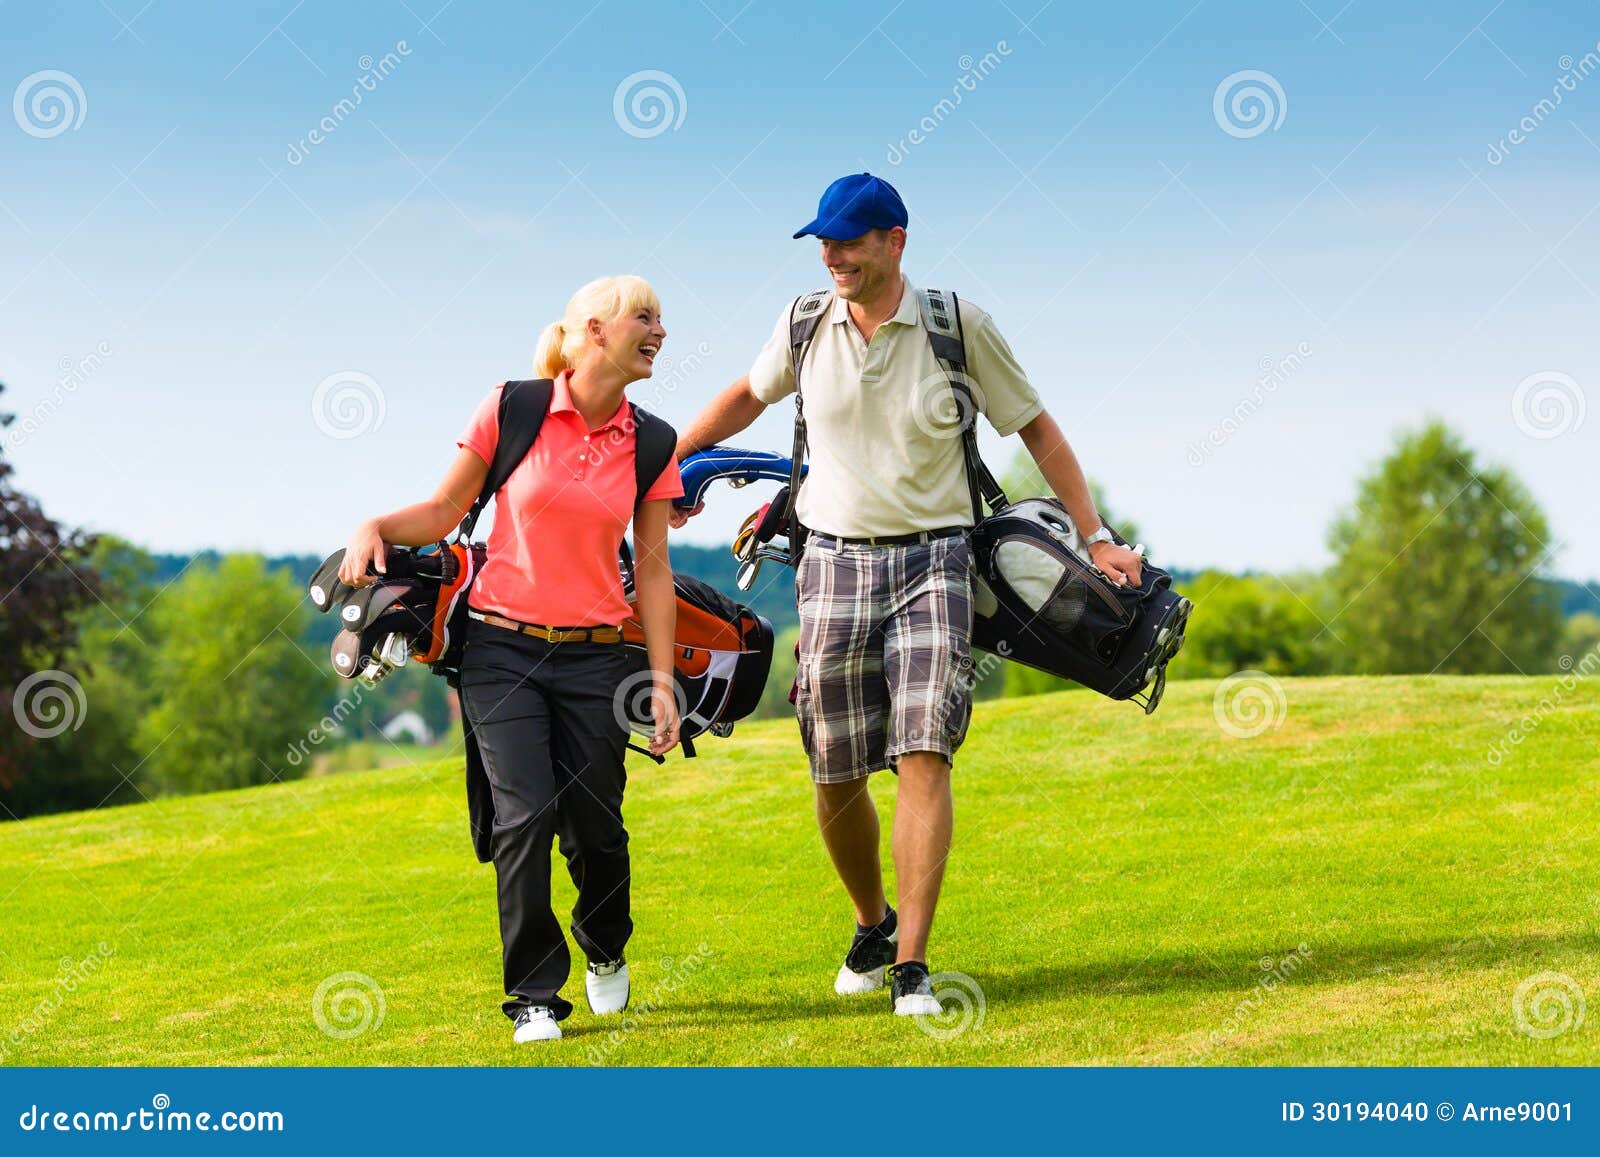 young sportive couple playing golf on a course